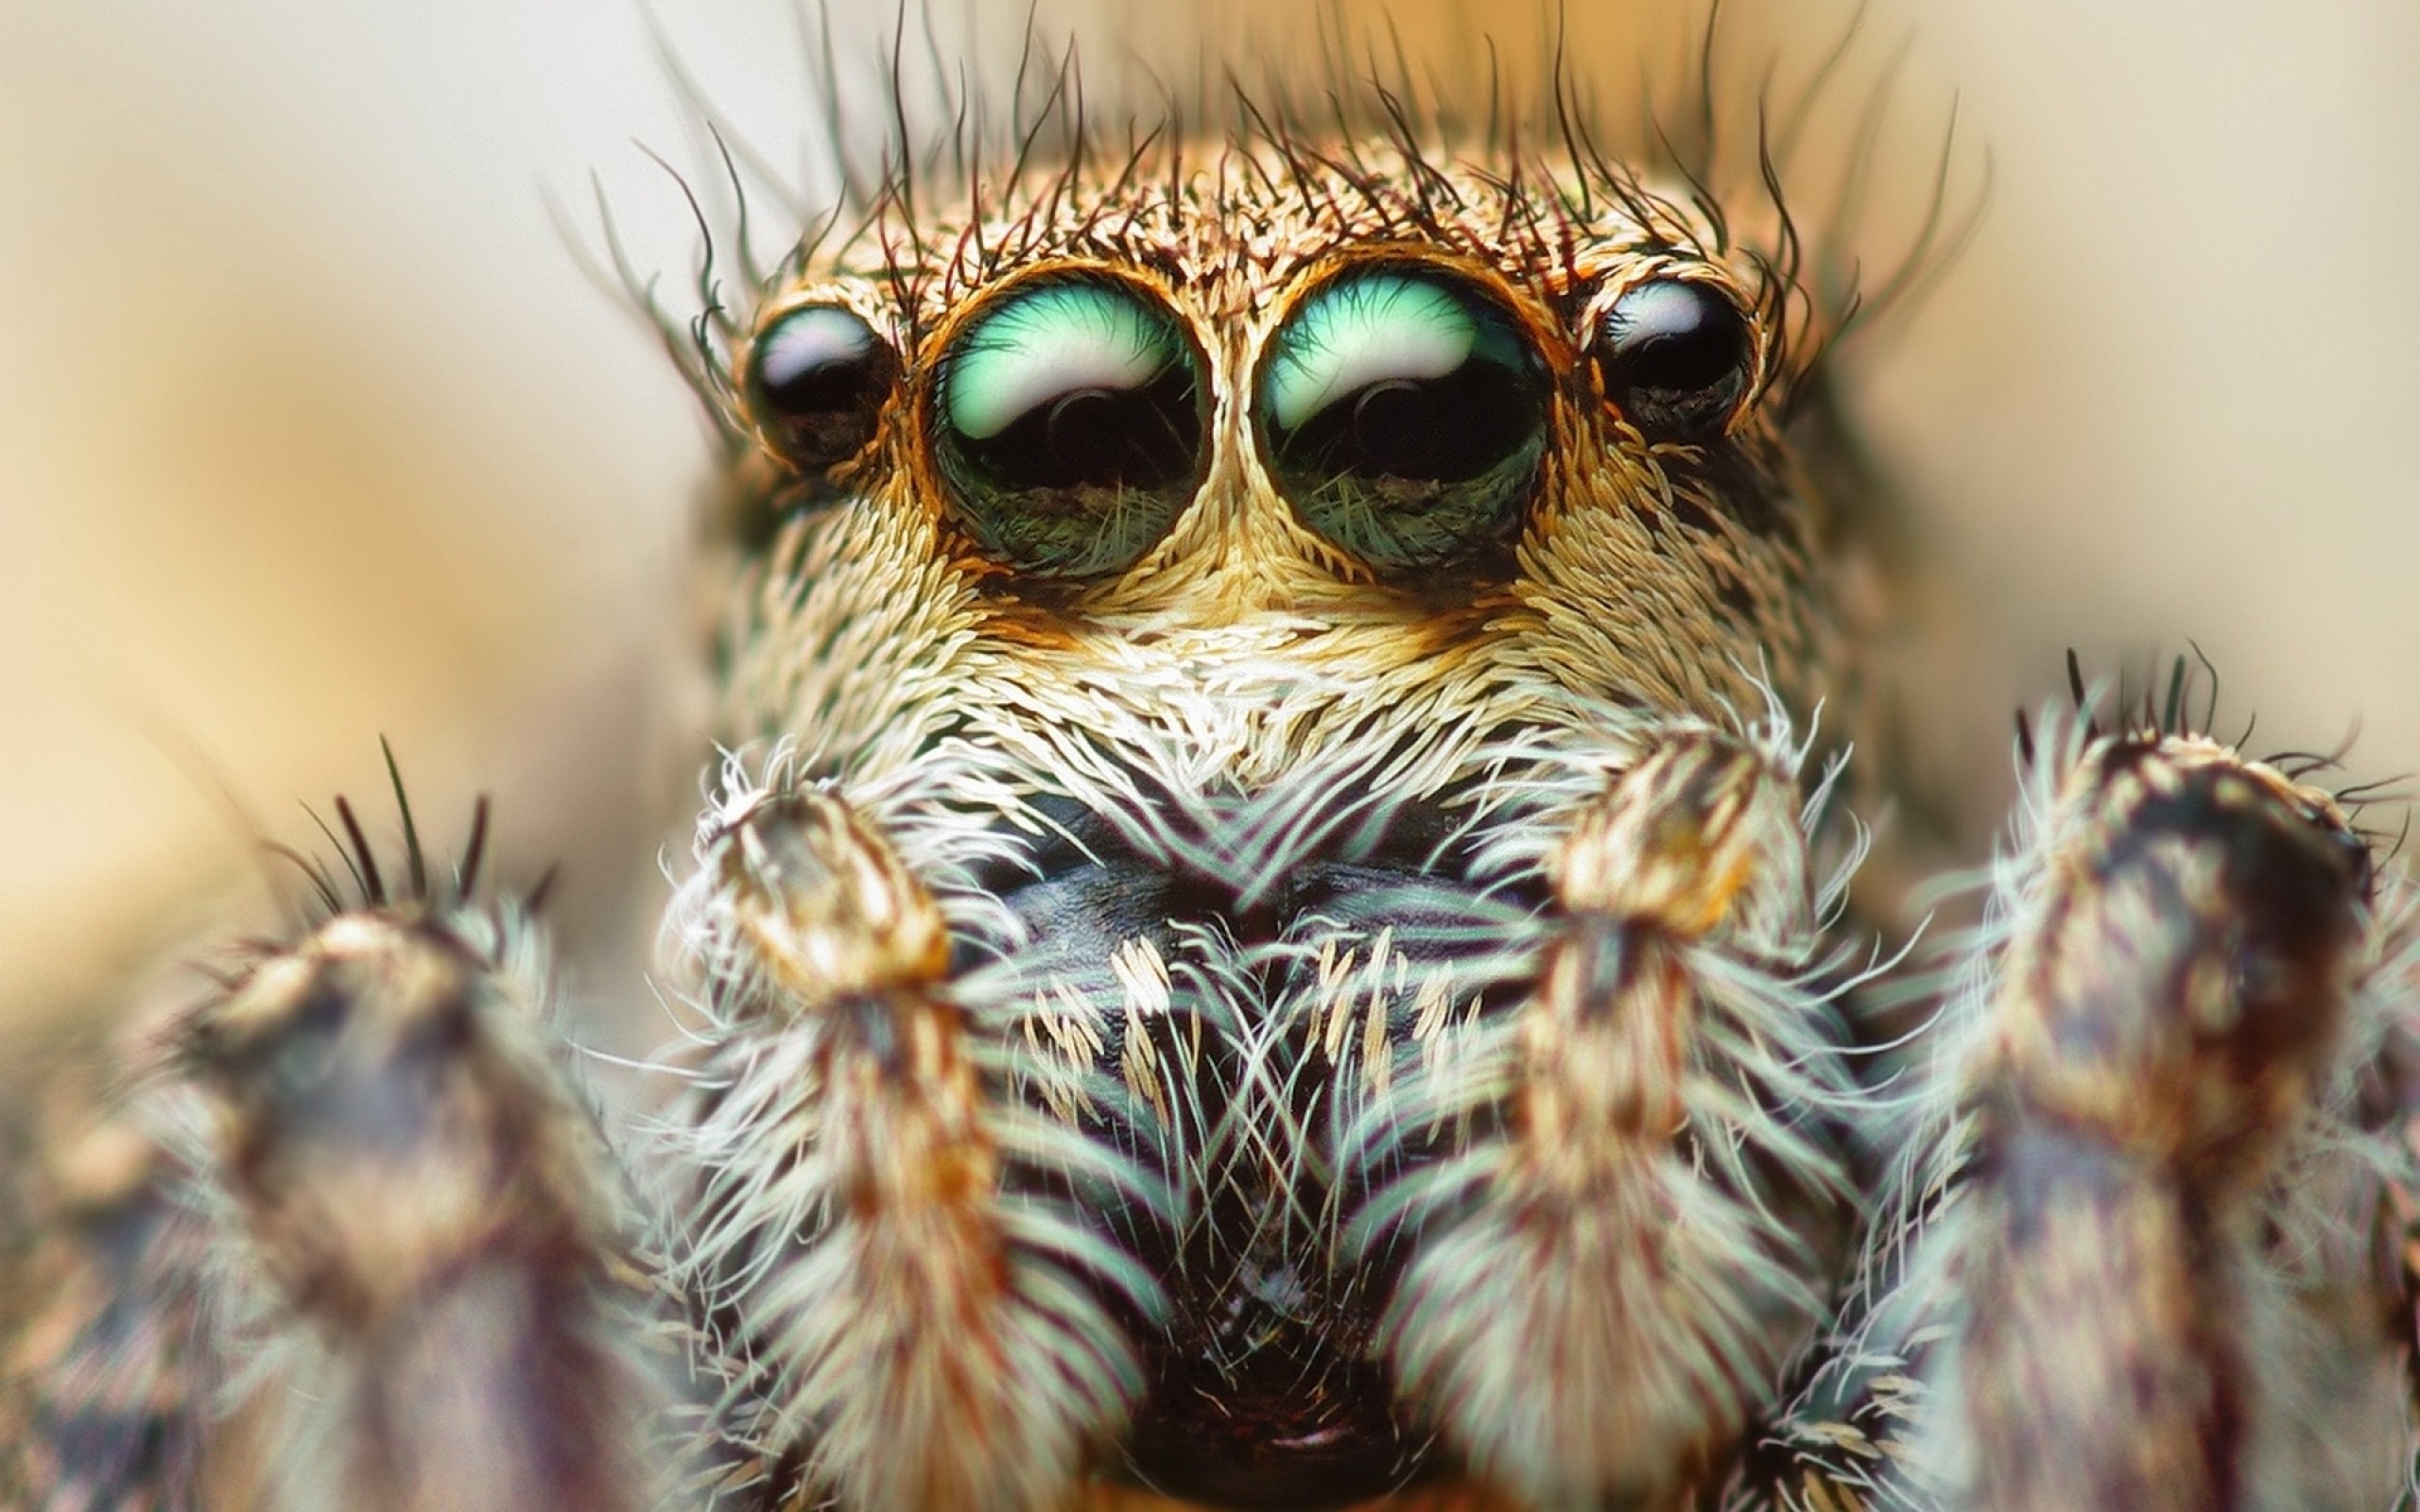 moving spider wallpaper,macro photography,close up,eye,organism,insect